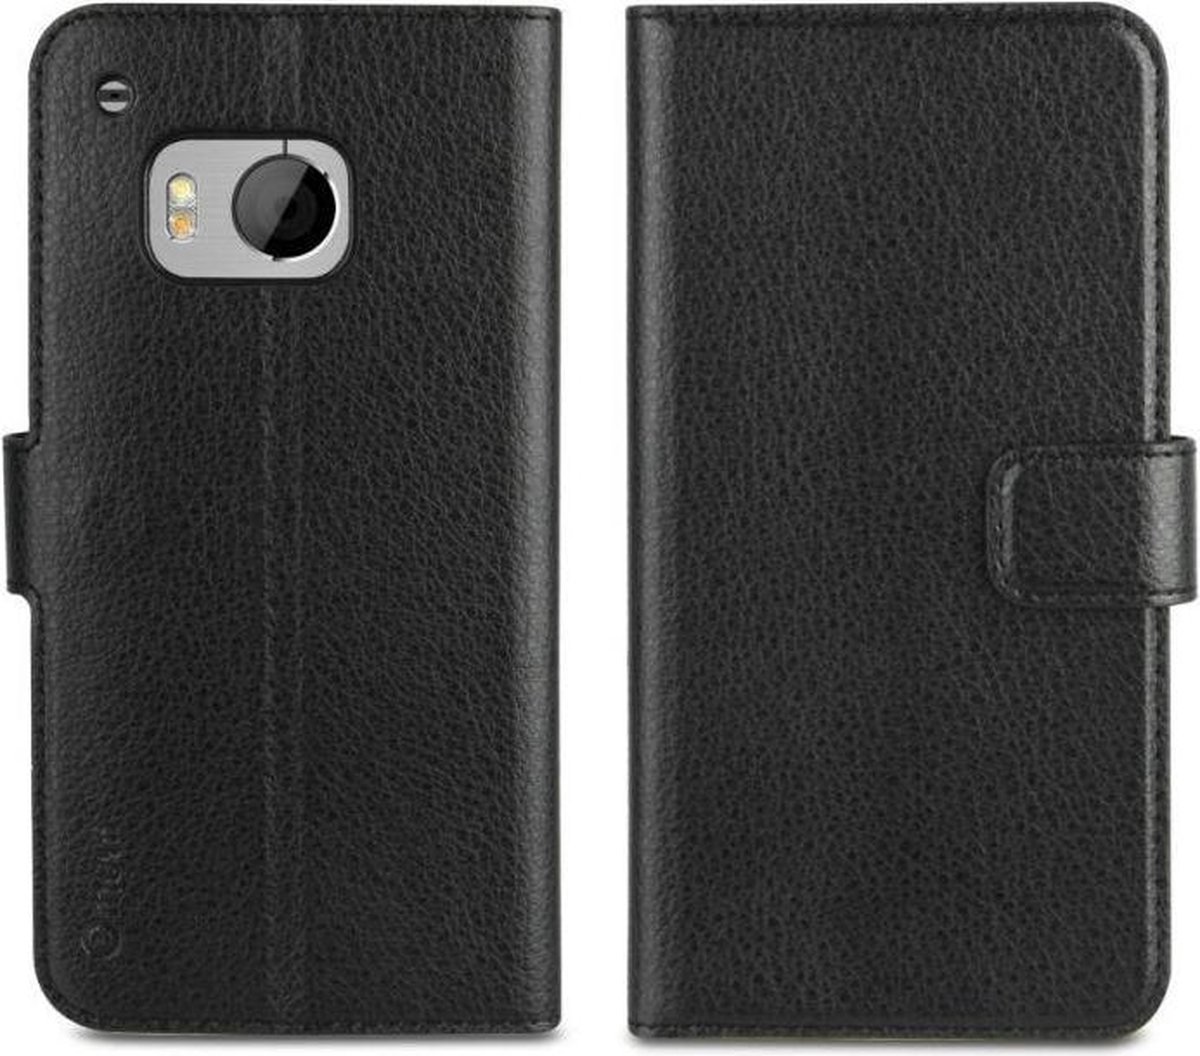 Muvit HTC One (M9) Wallet case with 3 cardslots - Black